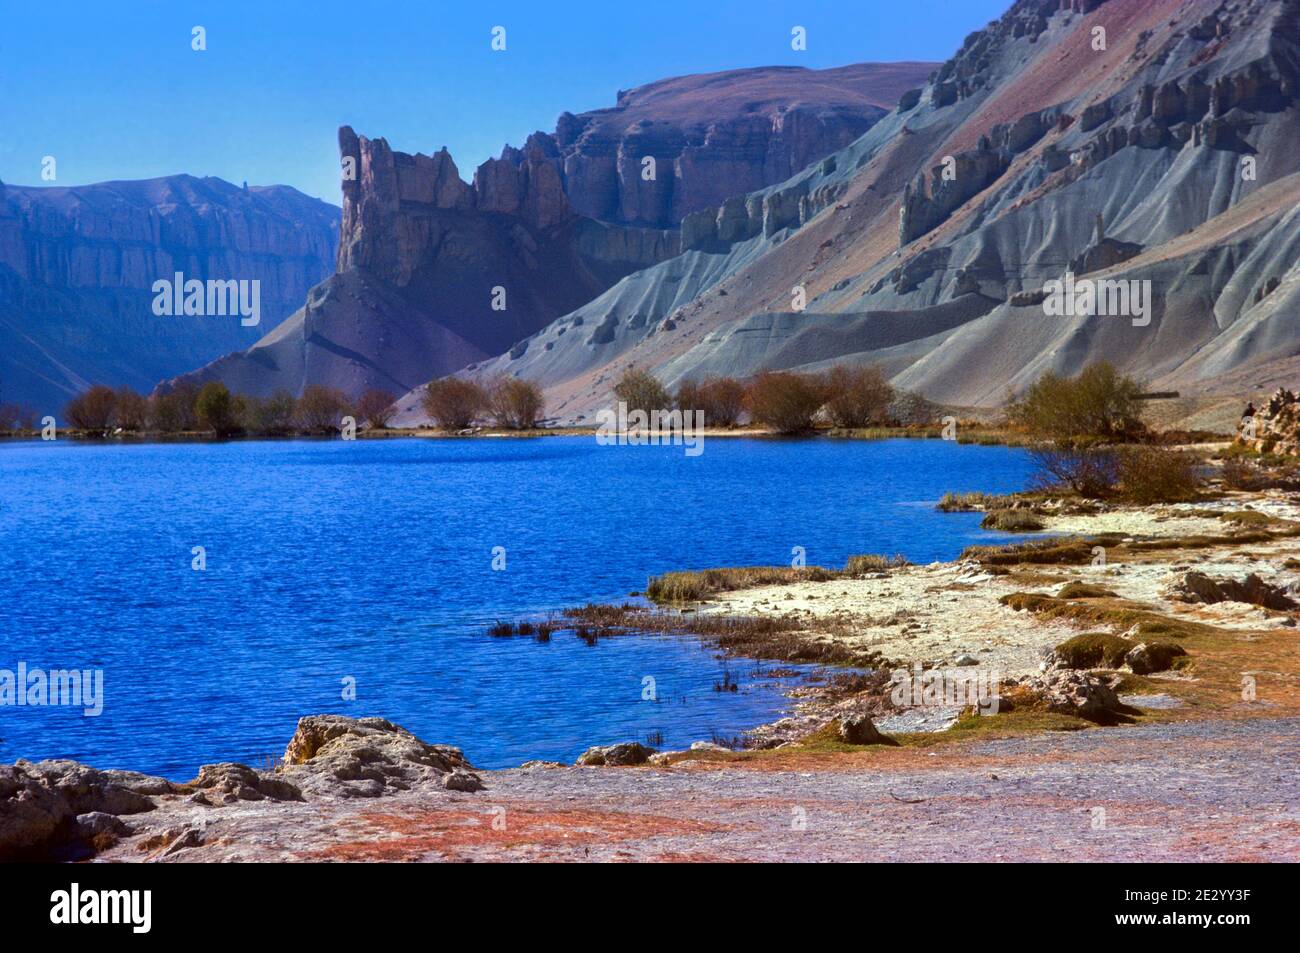 Band e Amir naturally formed lake Central Afghanistan Stock Photo